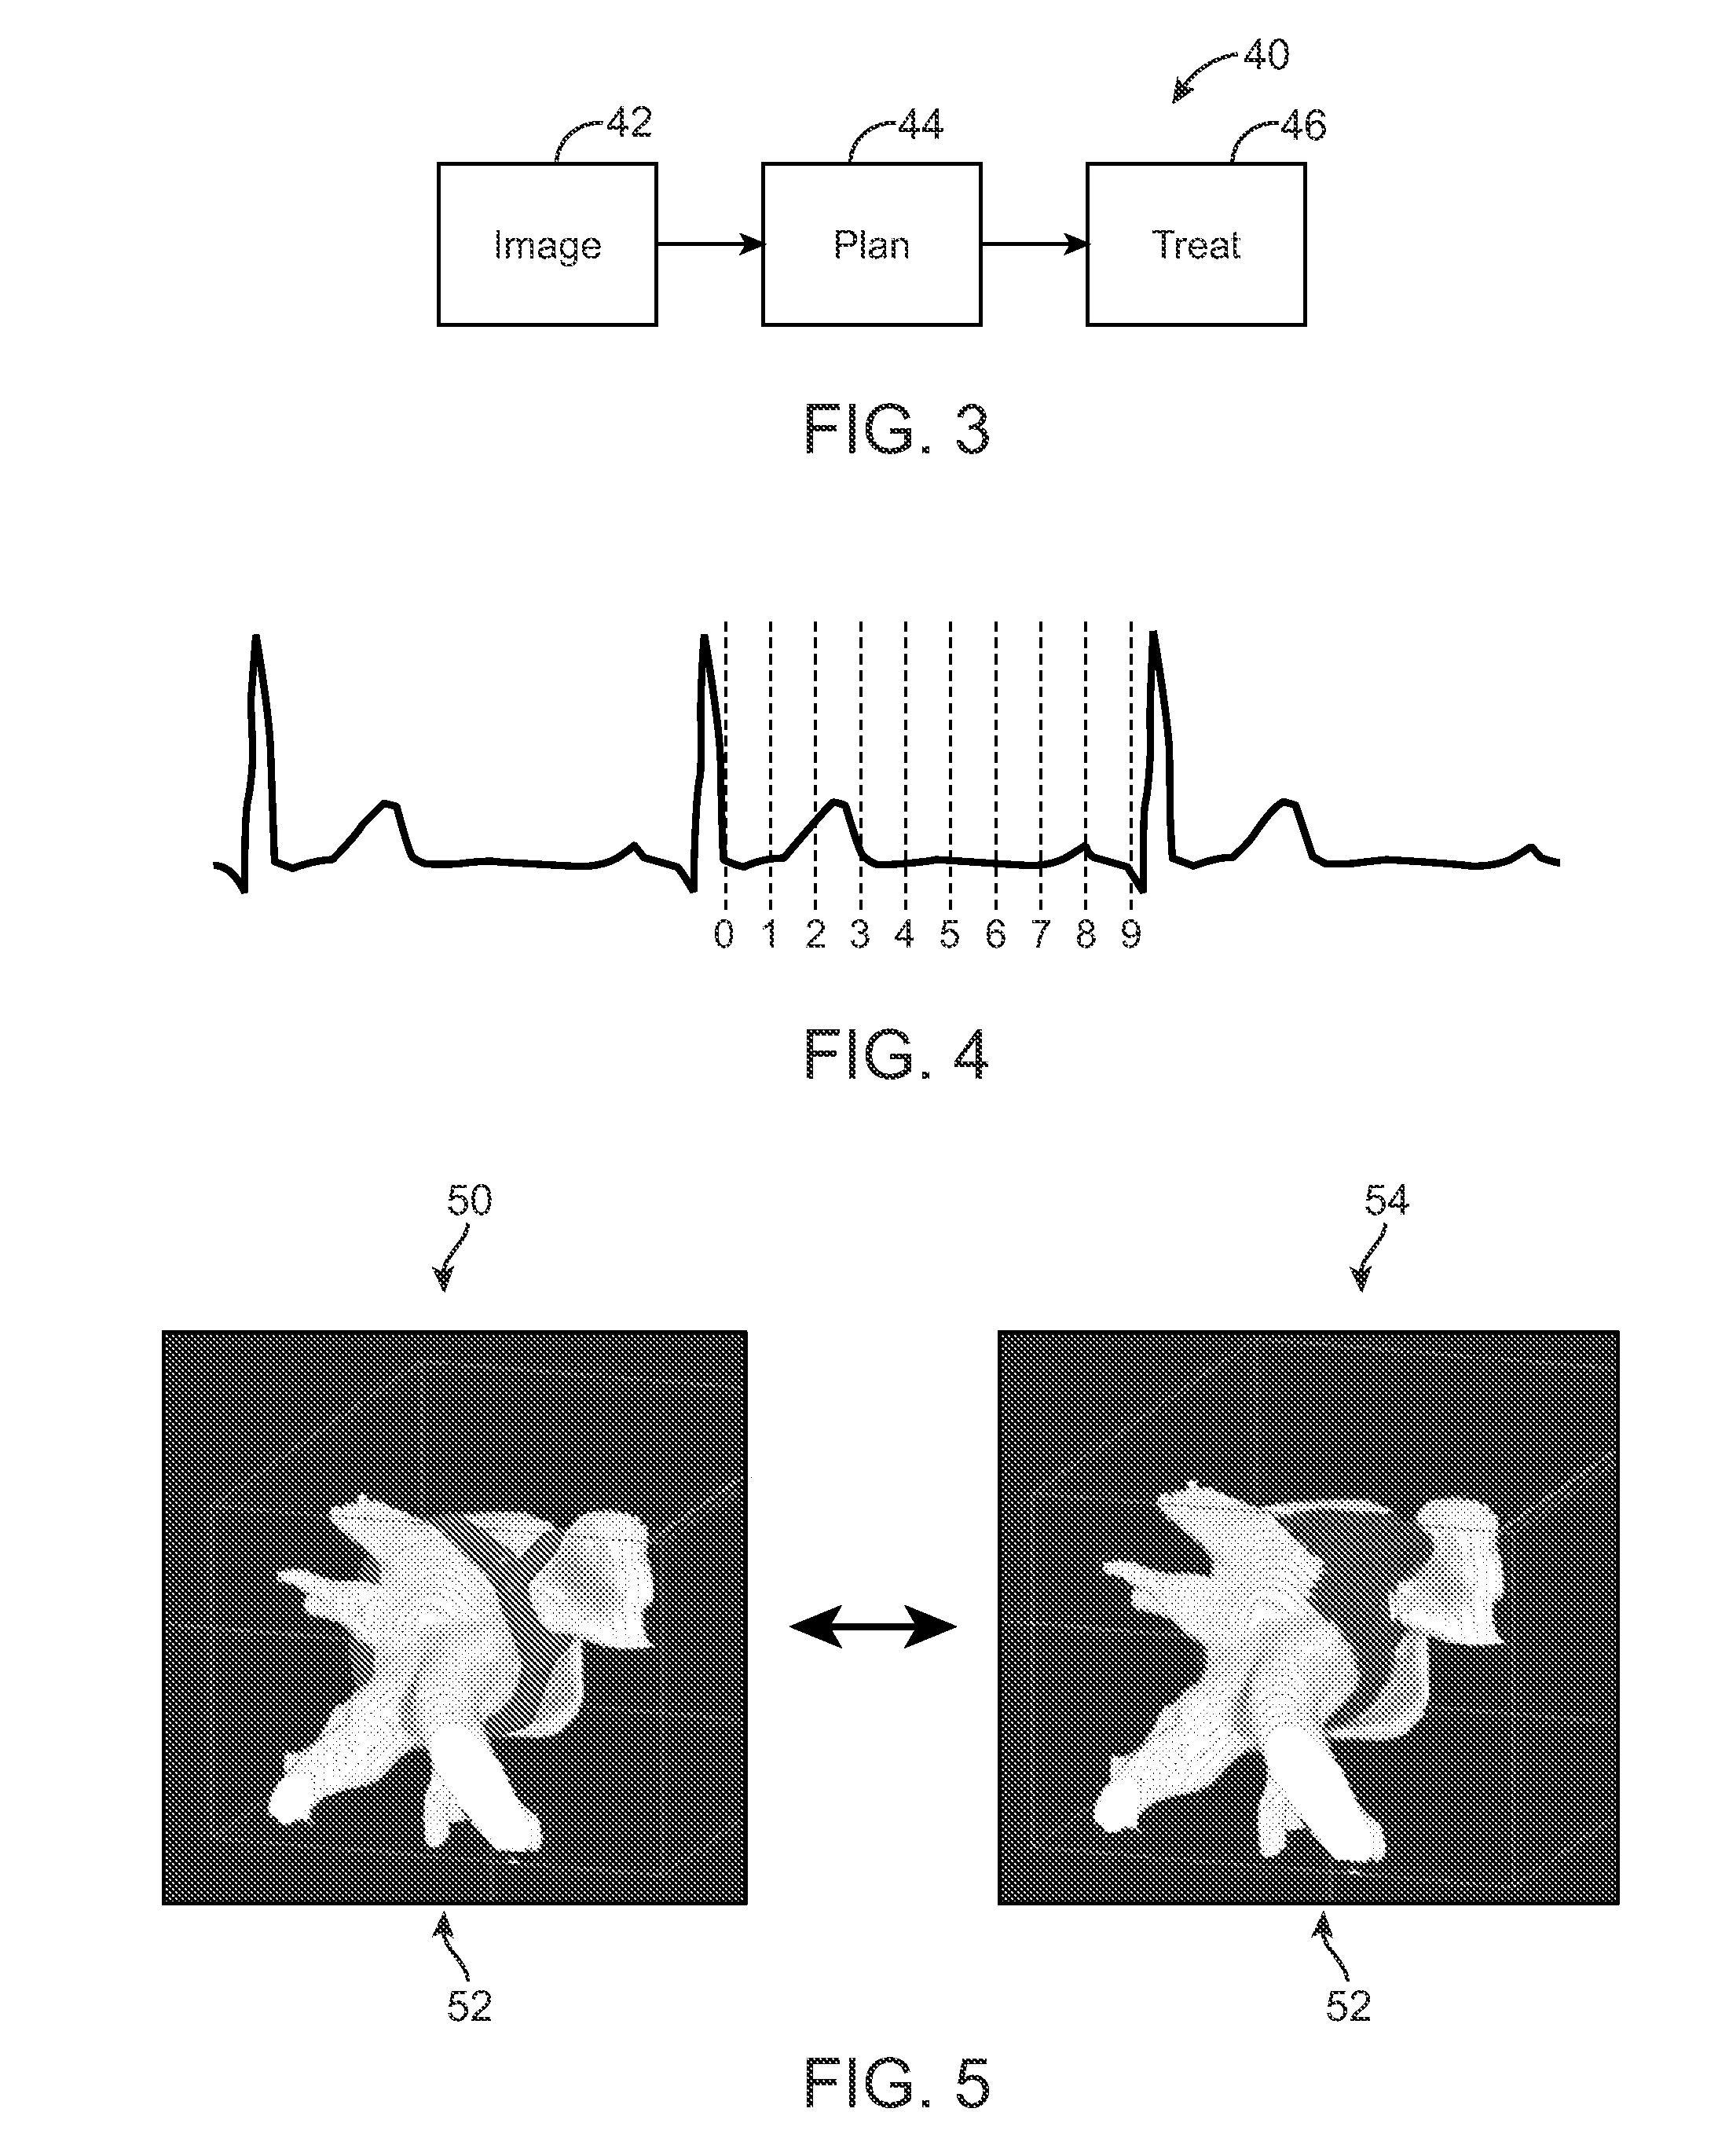 Heart Treatment Kit, System, and Method for Radiosurgically Alleviating Arrhythmia